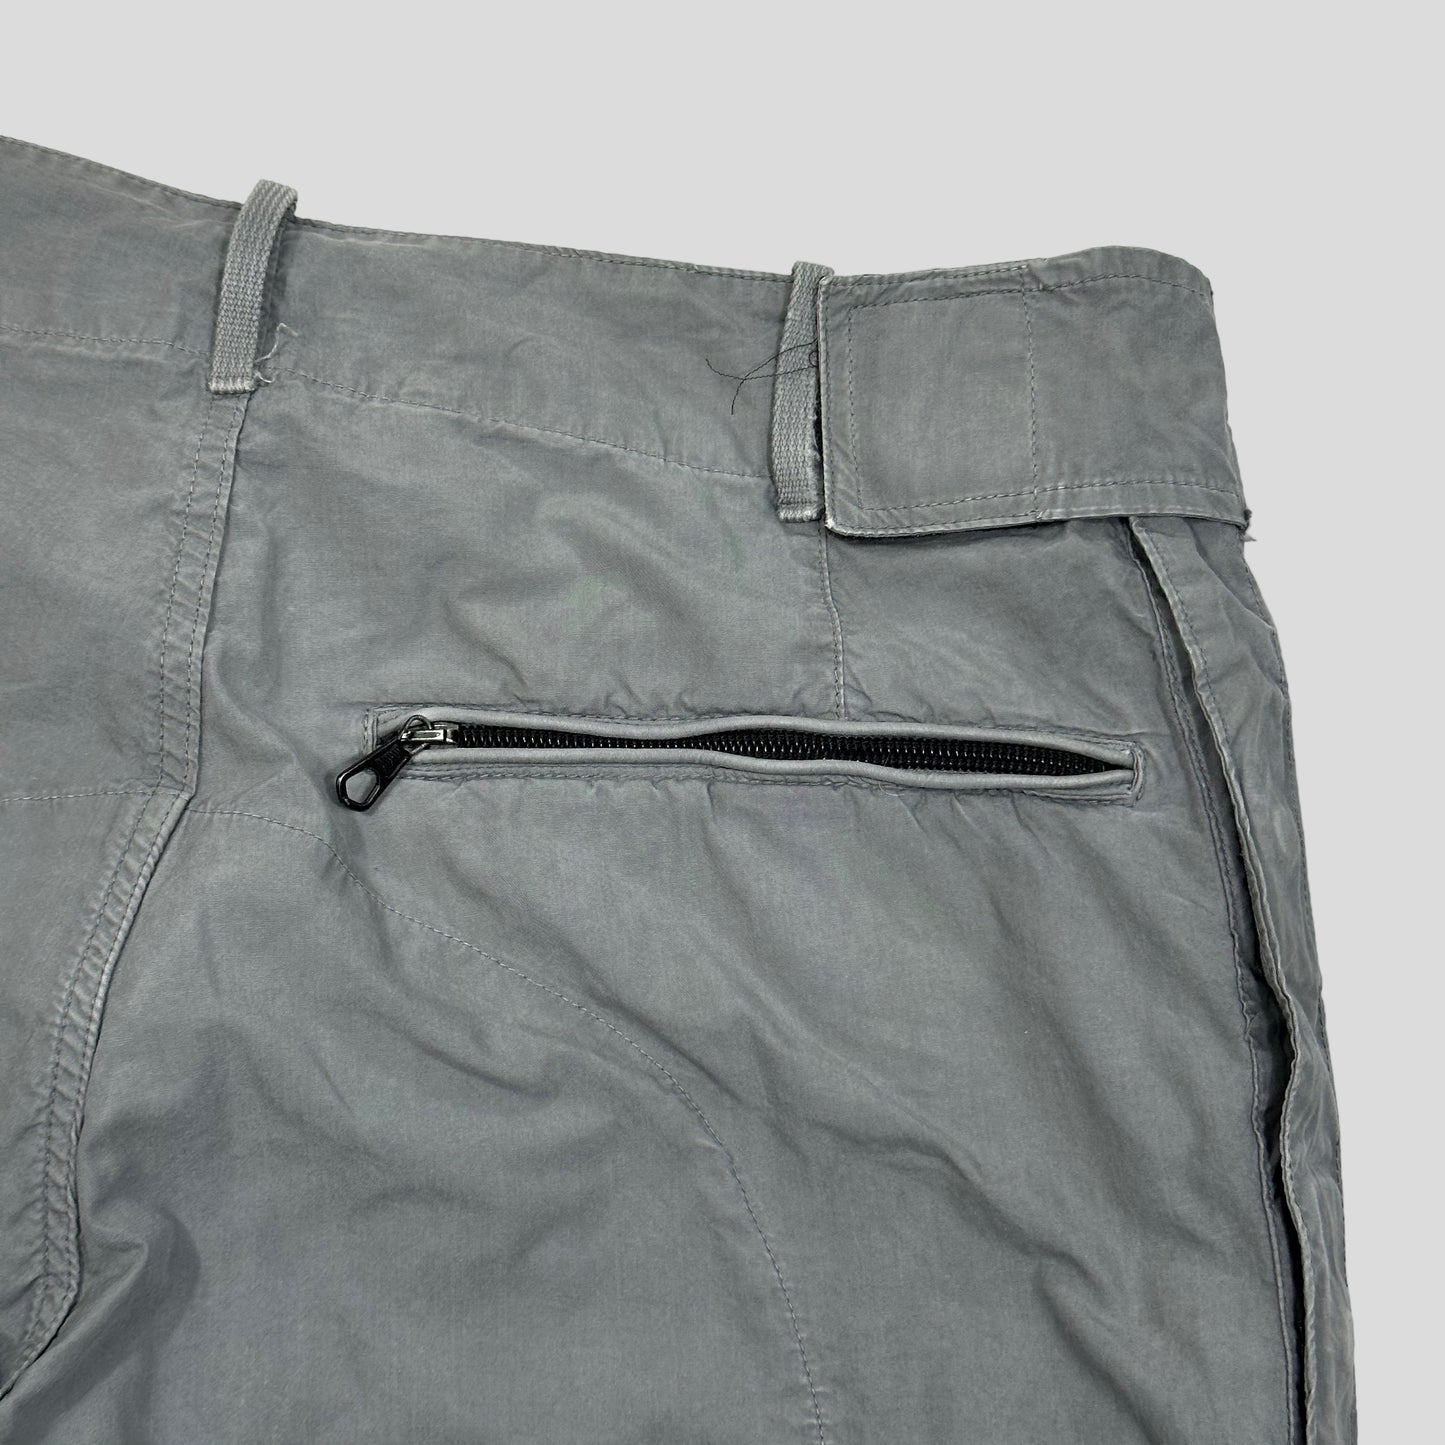 Stone Island 2006 Baggy Parachute Cargo Trousers - IT50